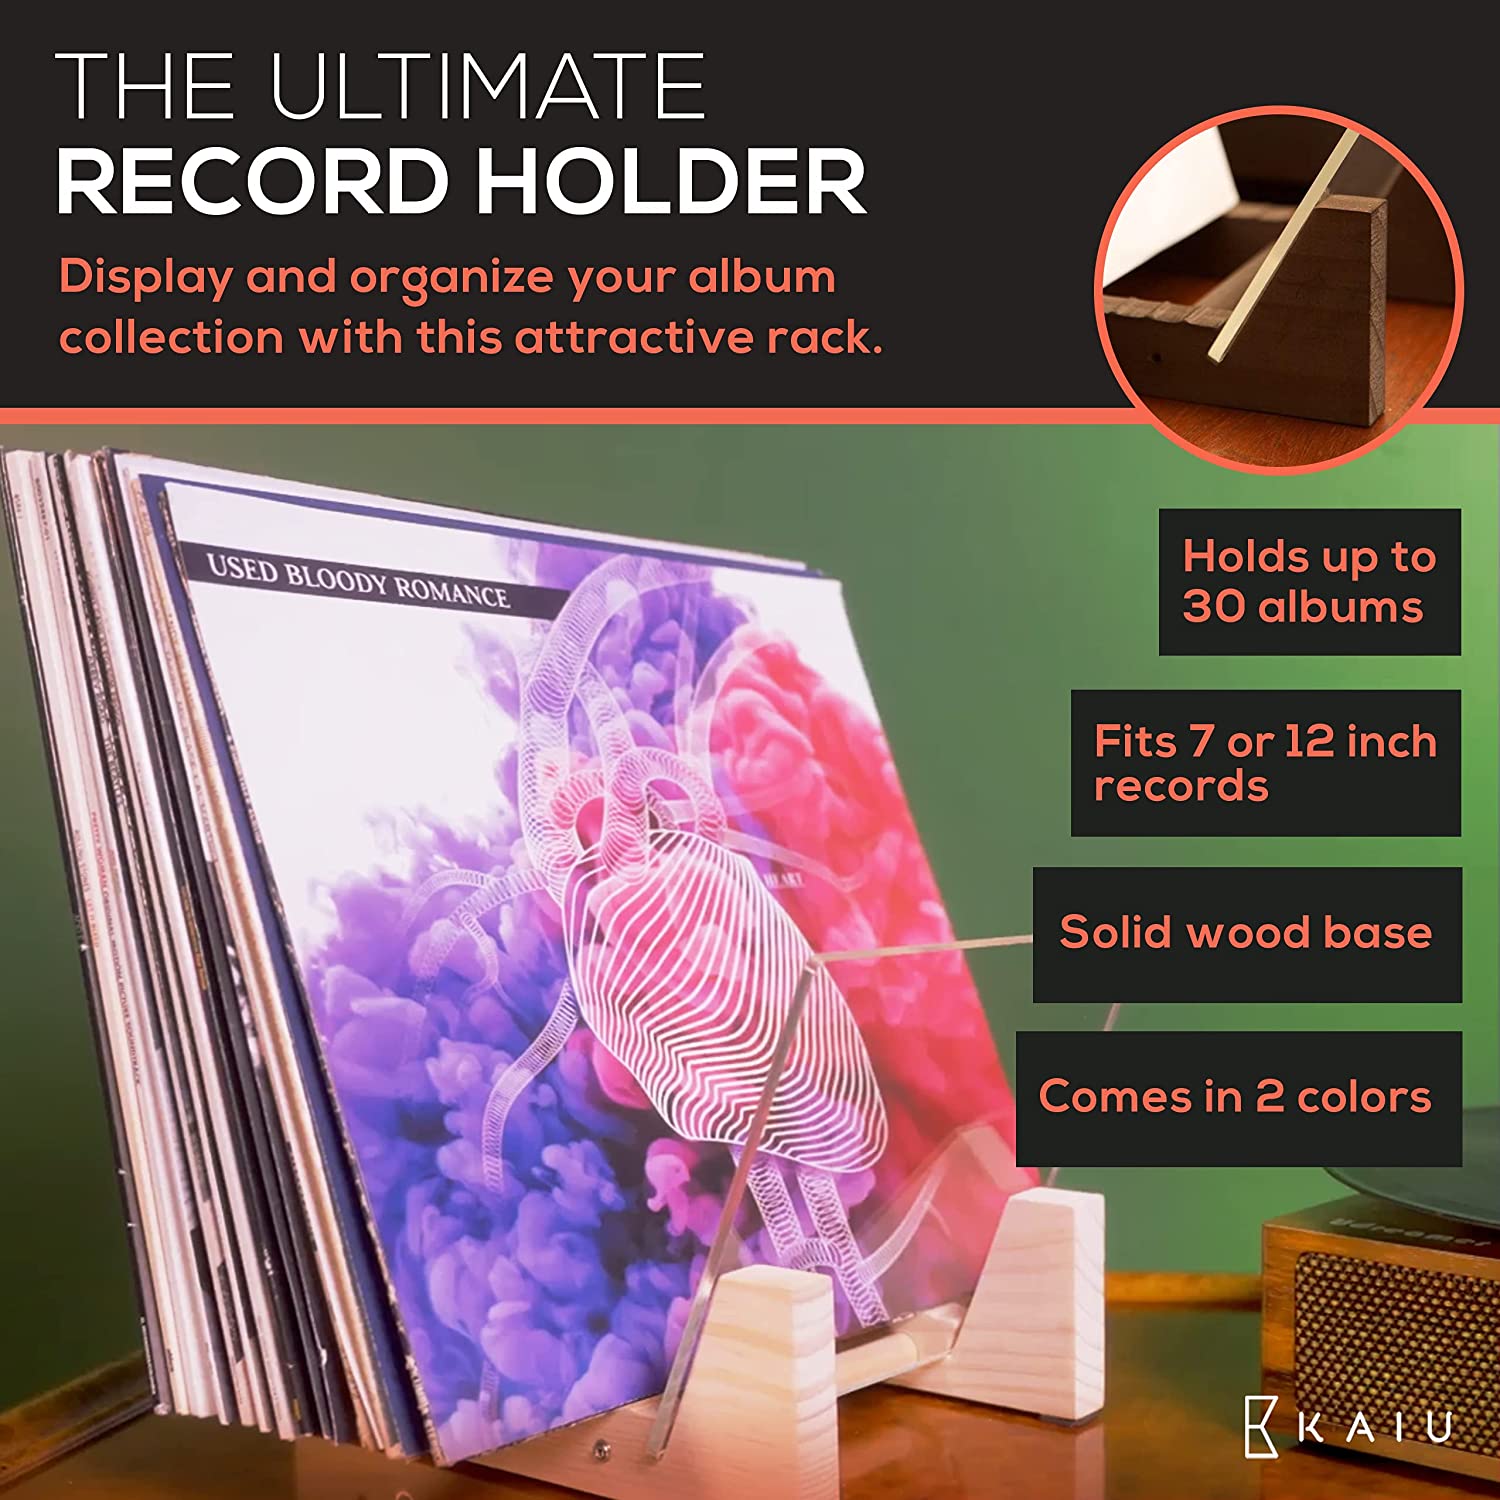 KAIU Vinyl Record Storage Holder - Stacks up to 30 Albums, 7 or 12 inch - Solid Wood Stand with Clear Acrylic Ends - Display Your Singles and LPs in This Modern Portable Rack Unit